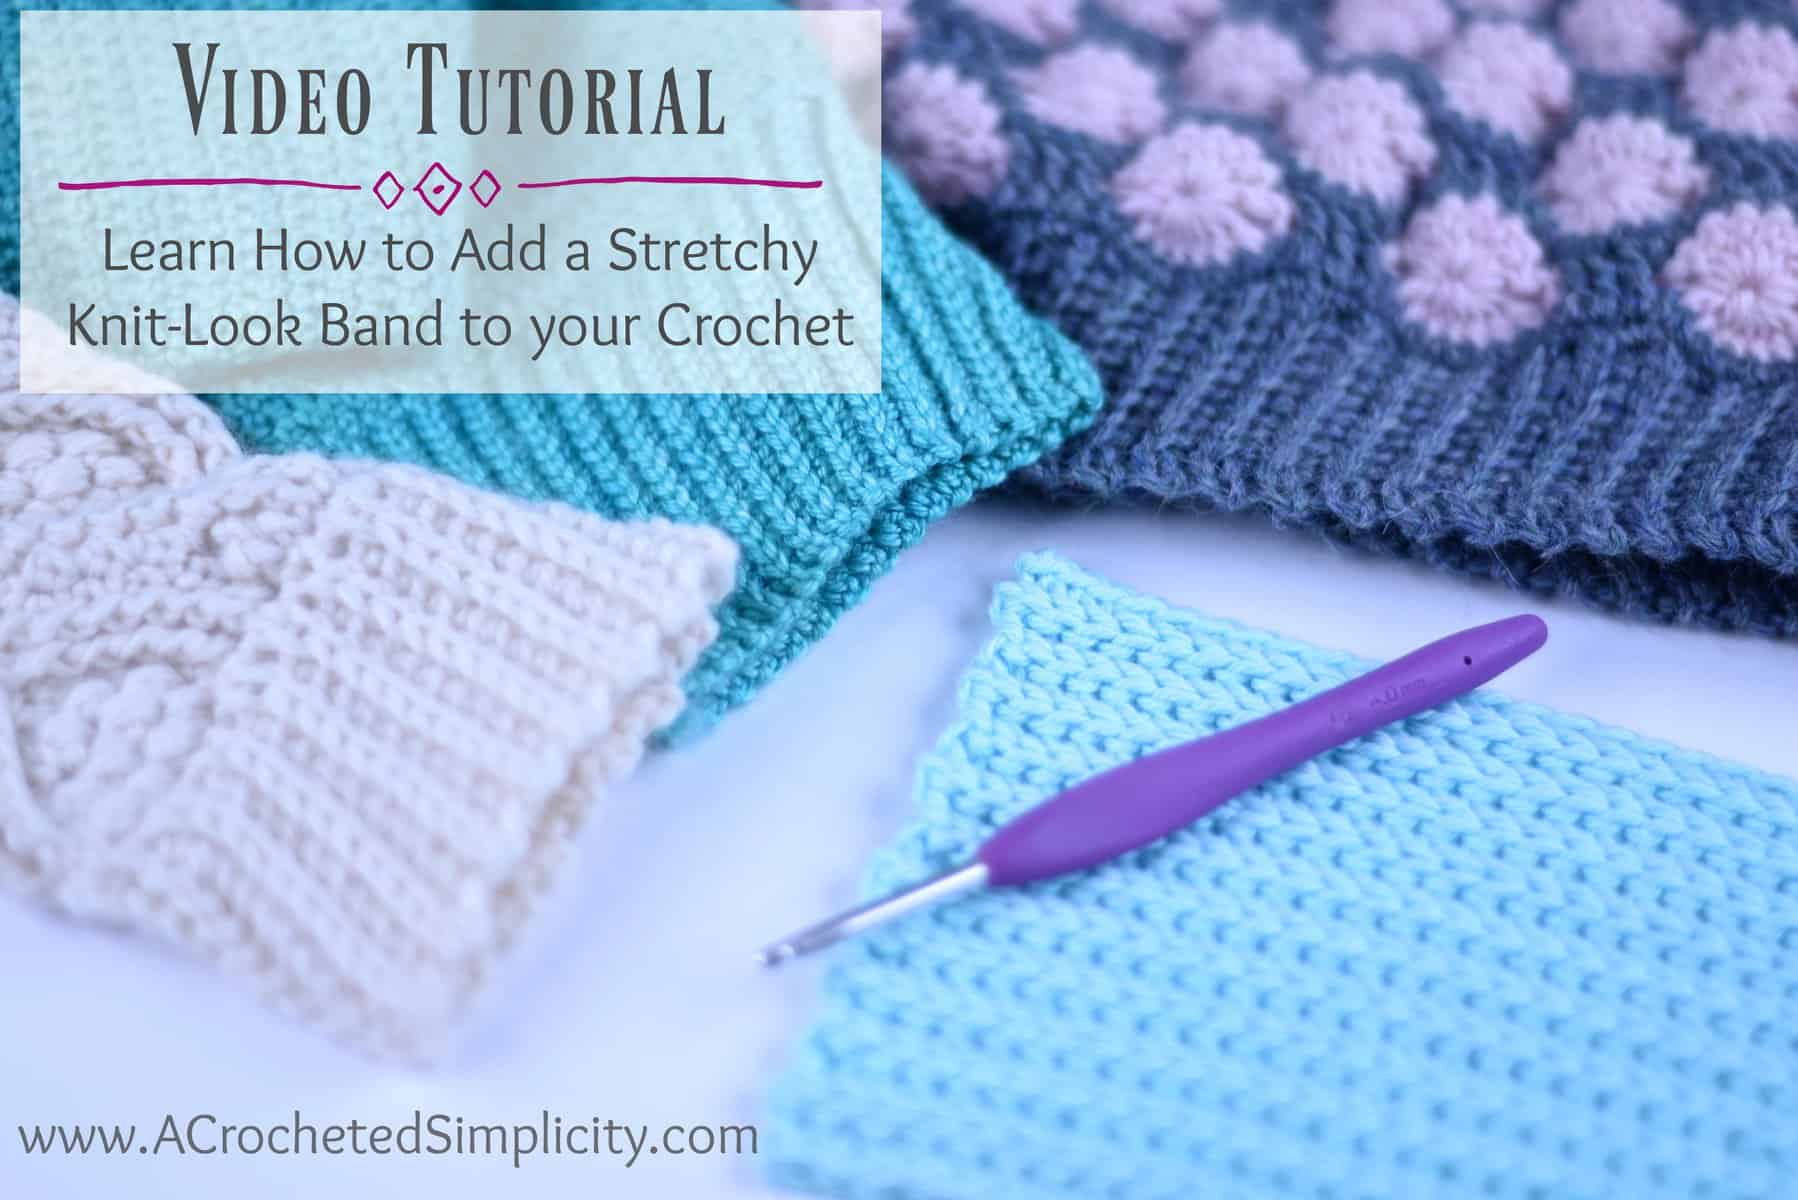 How to Add A Stretchy, Knit-Look Ribbed Band or Cuff to Your